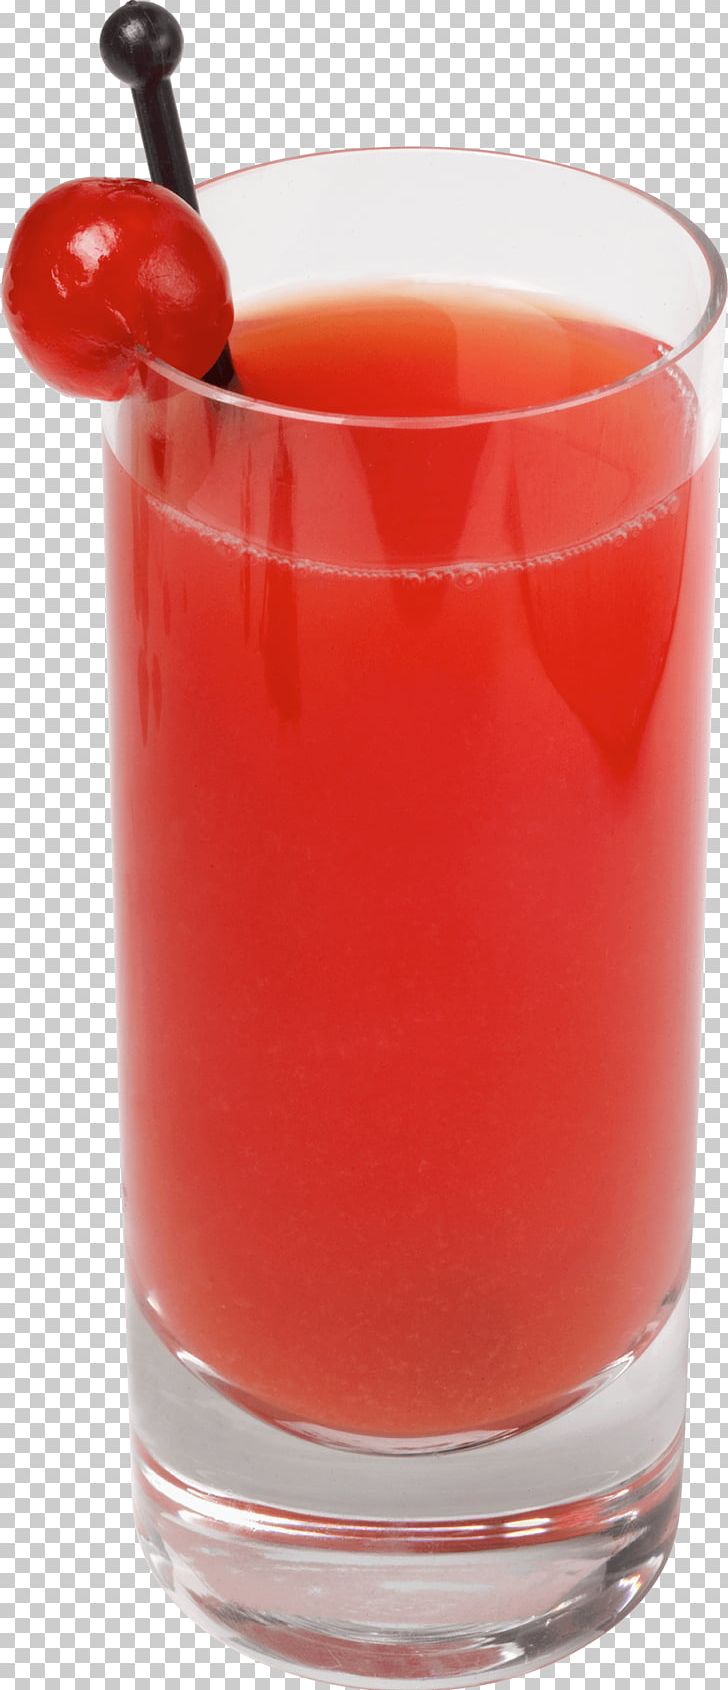 Orange Juice Cocktail Tomato Juice Strawberry Juice PNG, Clipart, Bay Breeze, Chia, Cocktail Garnish, Coconut Water, Download Free PNG Download